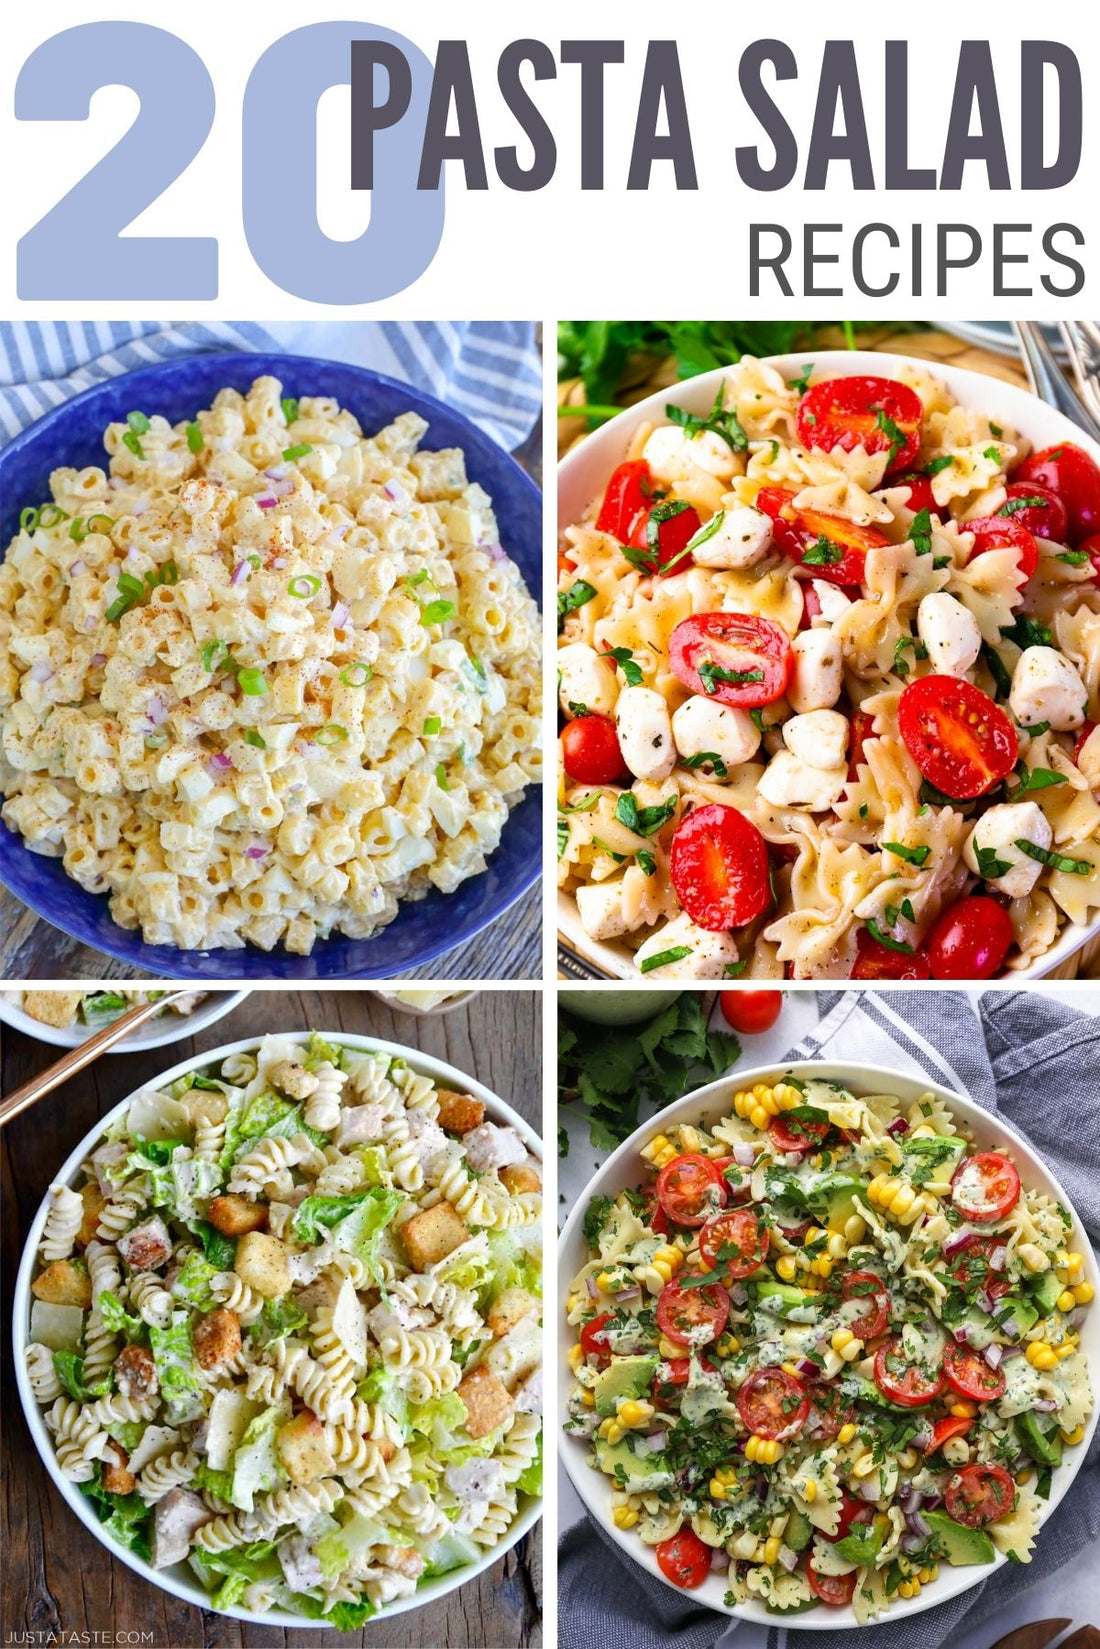 20 Easy Pasta Salad Recipes - Turn Your Pasta Salad into a Meal